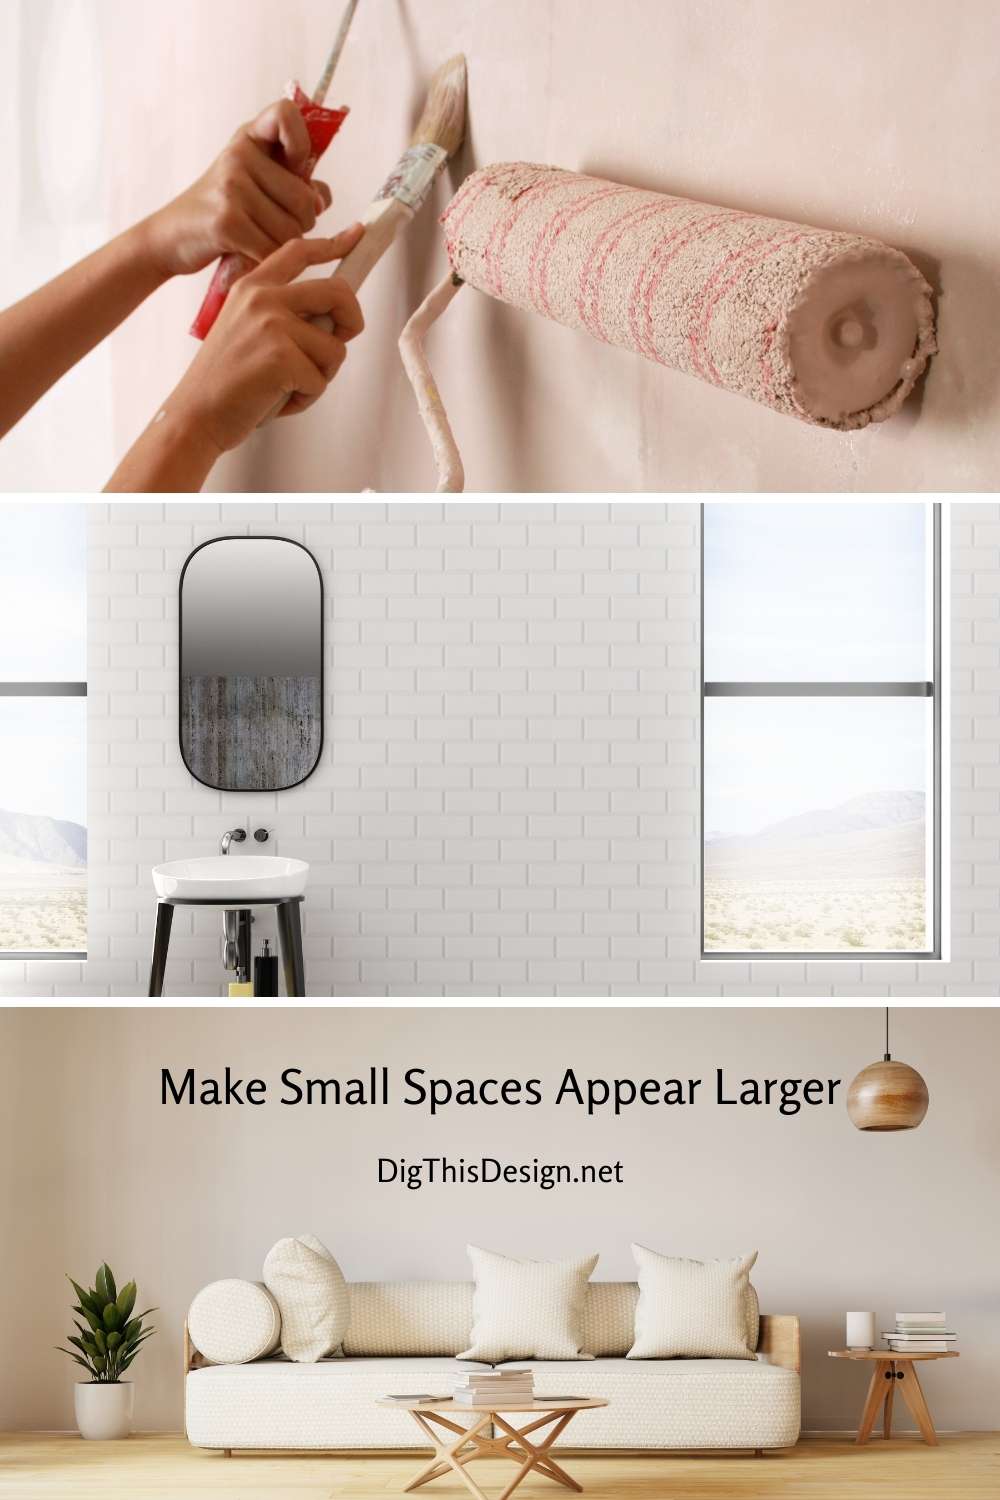 Make Small Spaces Appear Larger - Design Tips